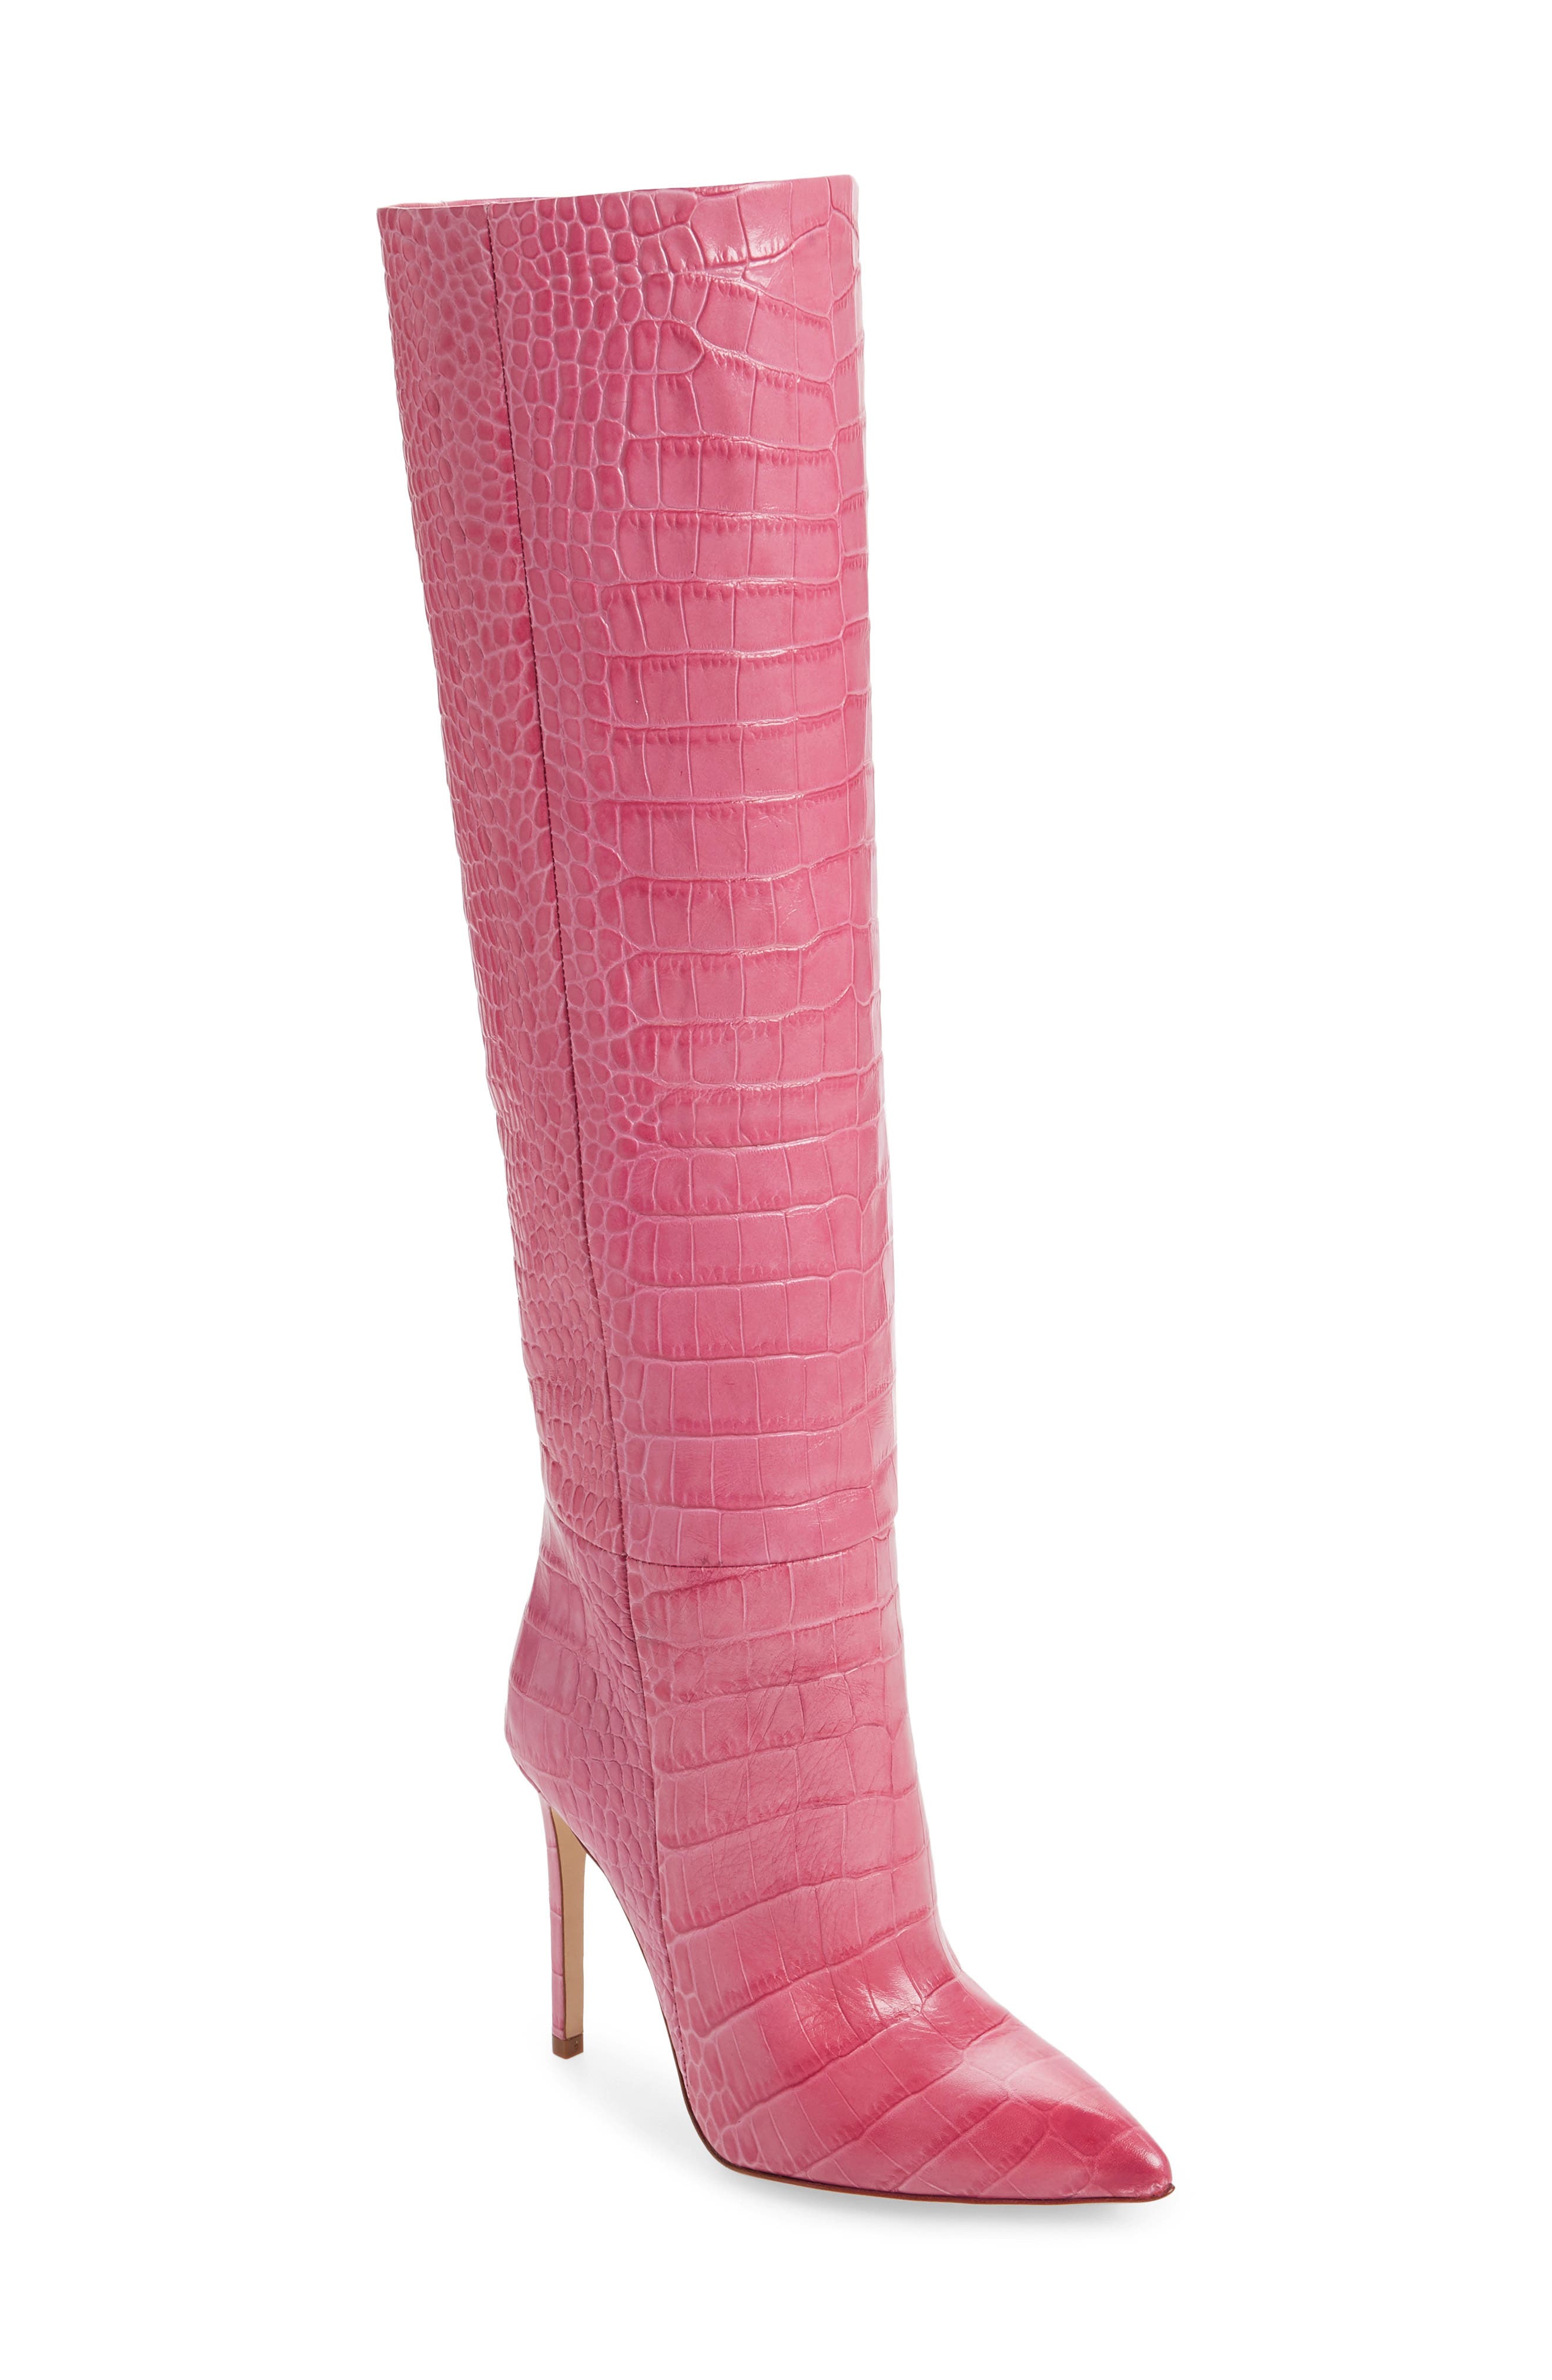 light pink leather boots